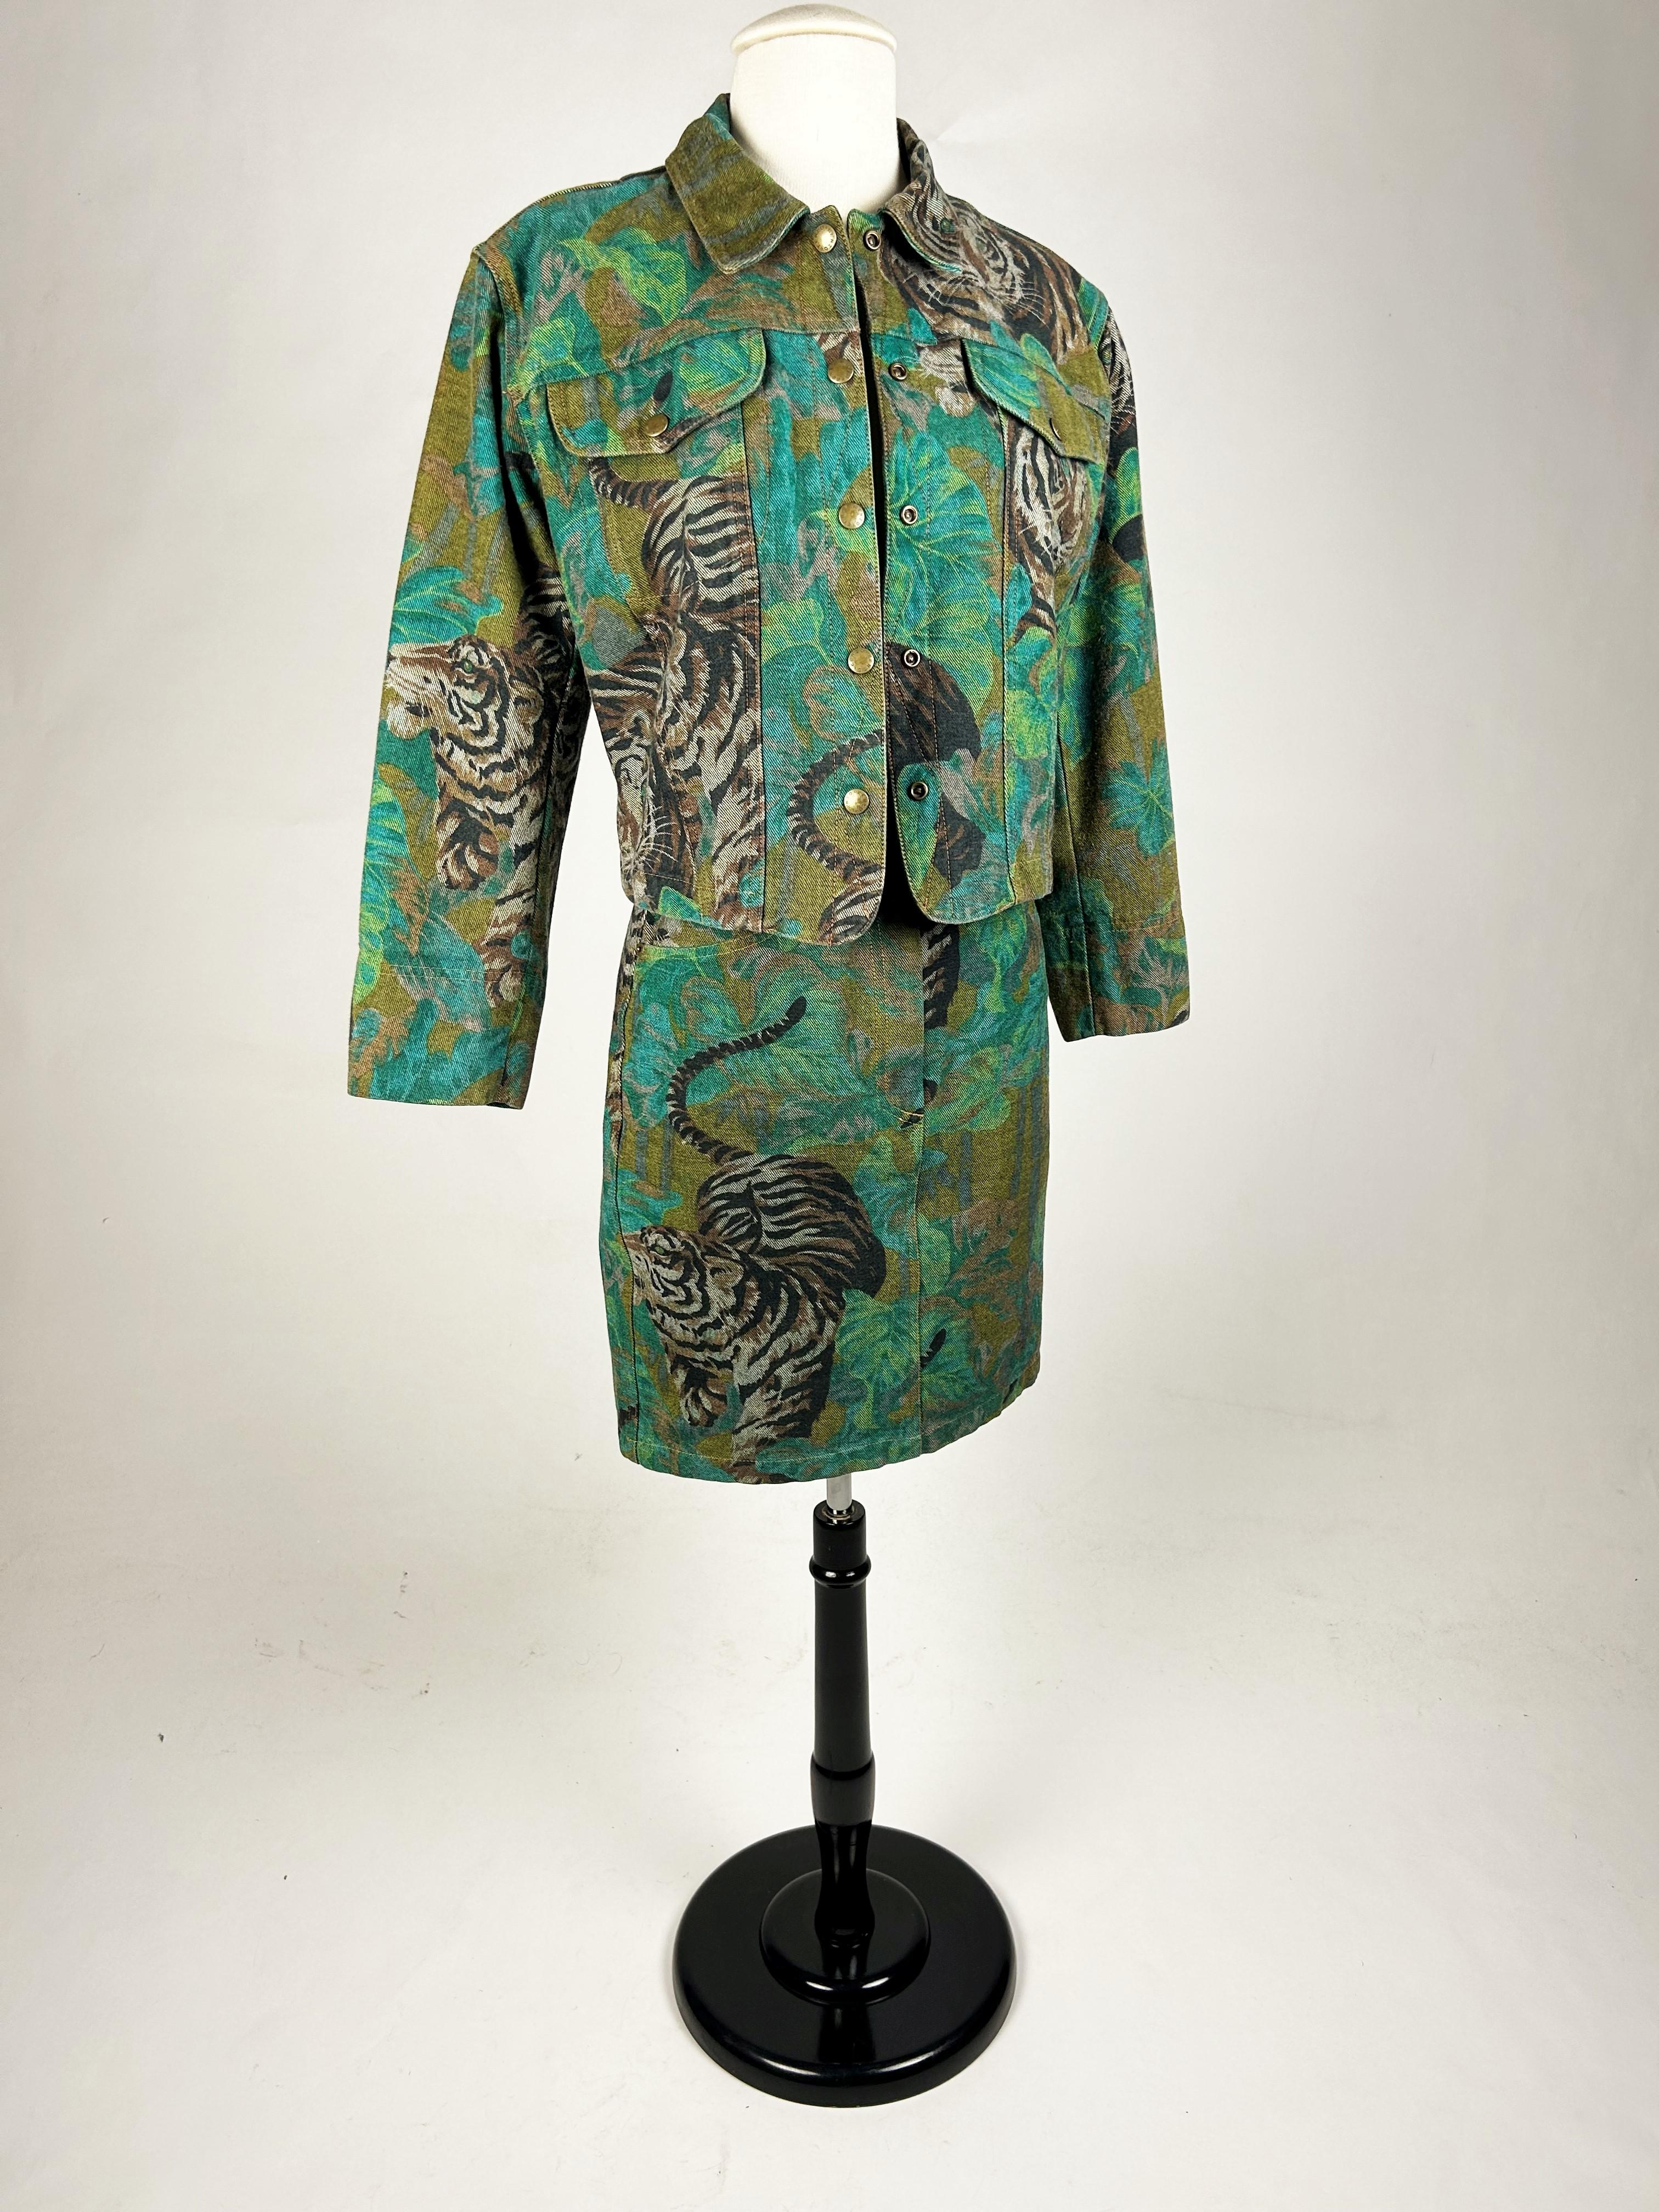 Jacket and Skirt by Kenzo Takada, Jungle & Tiger Print on Denim - French C. 1990 For Sale 9